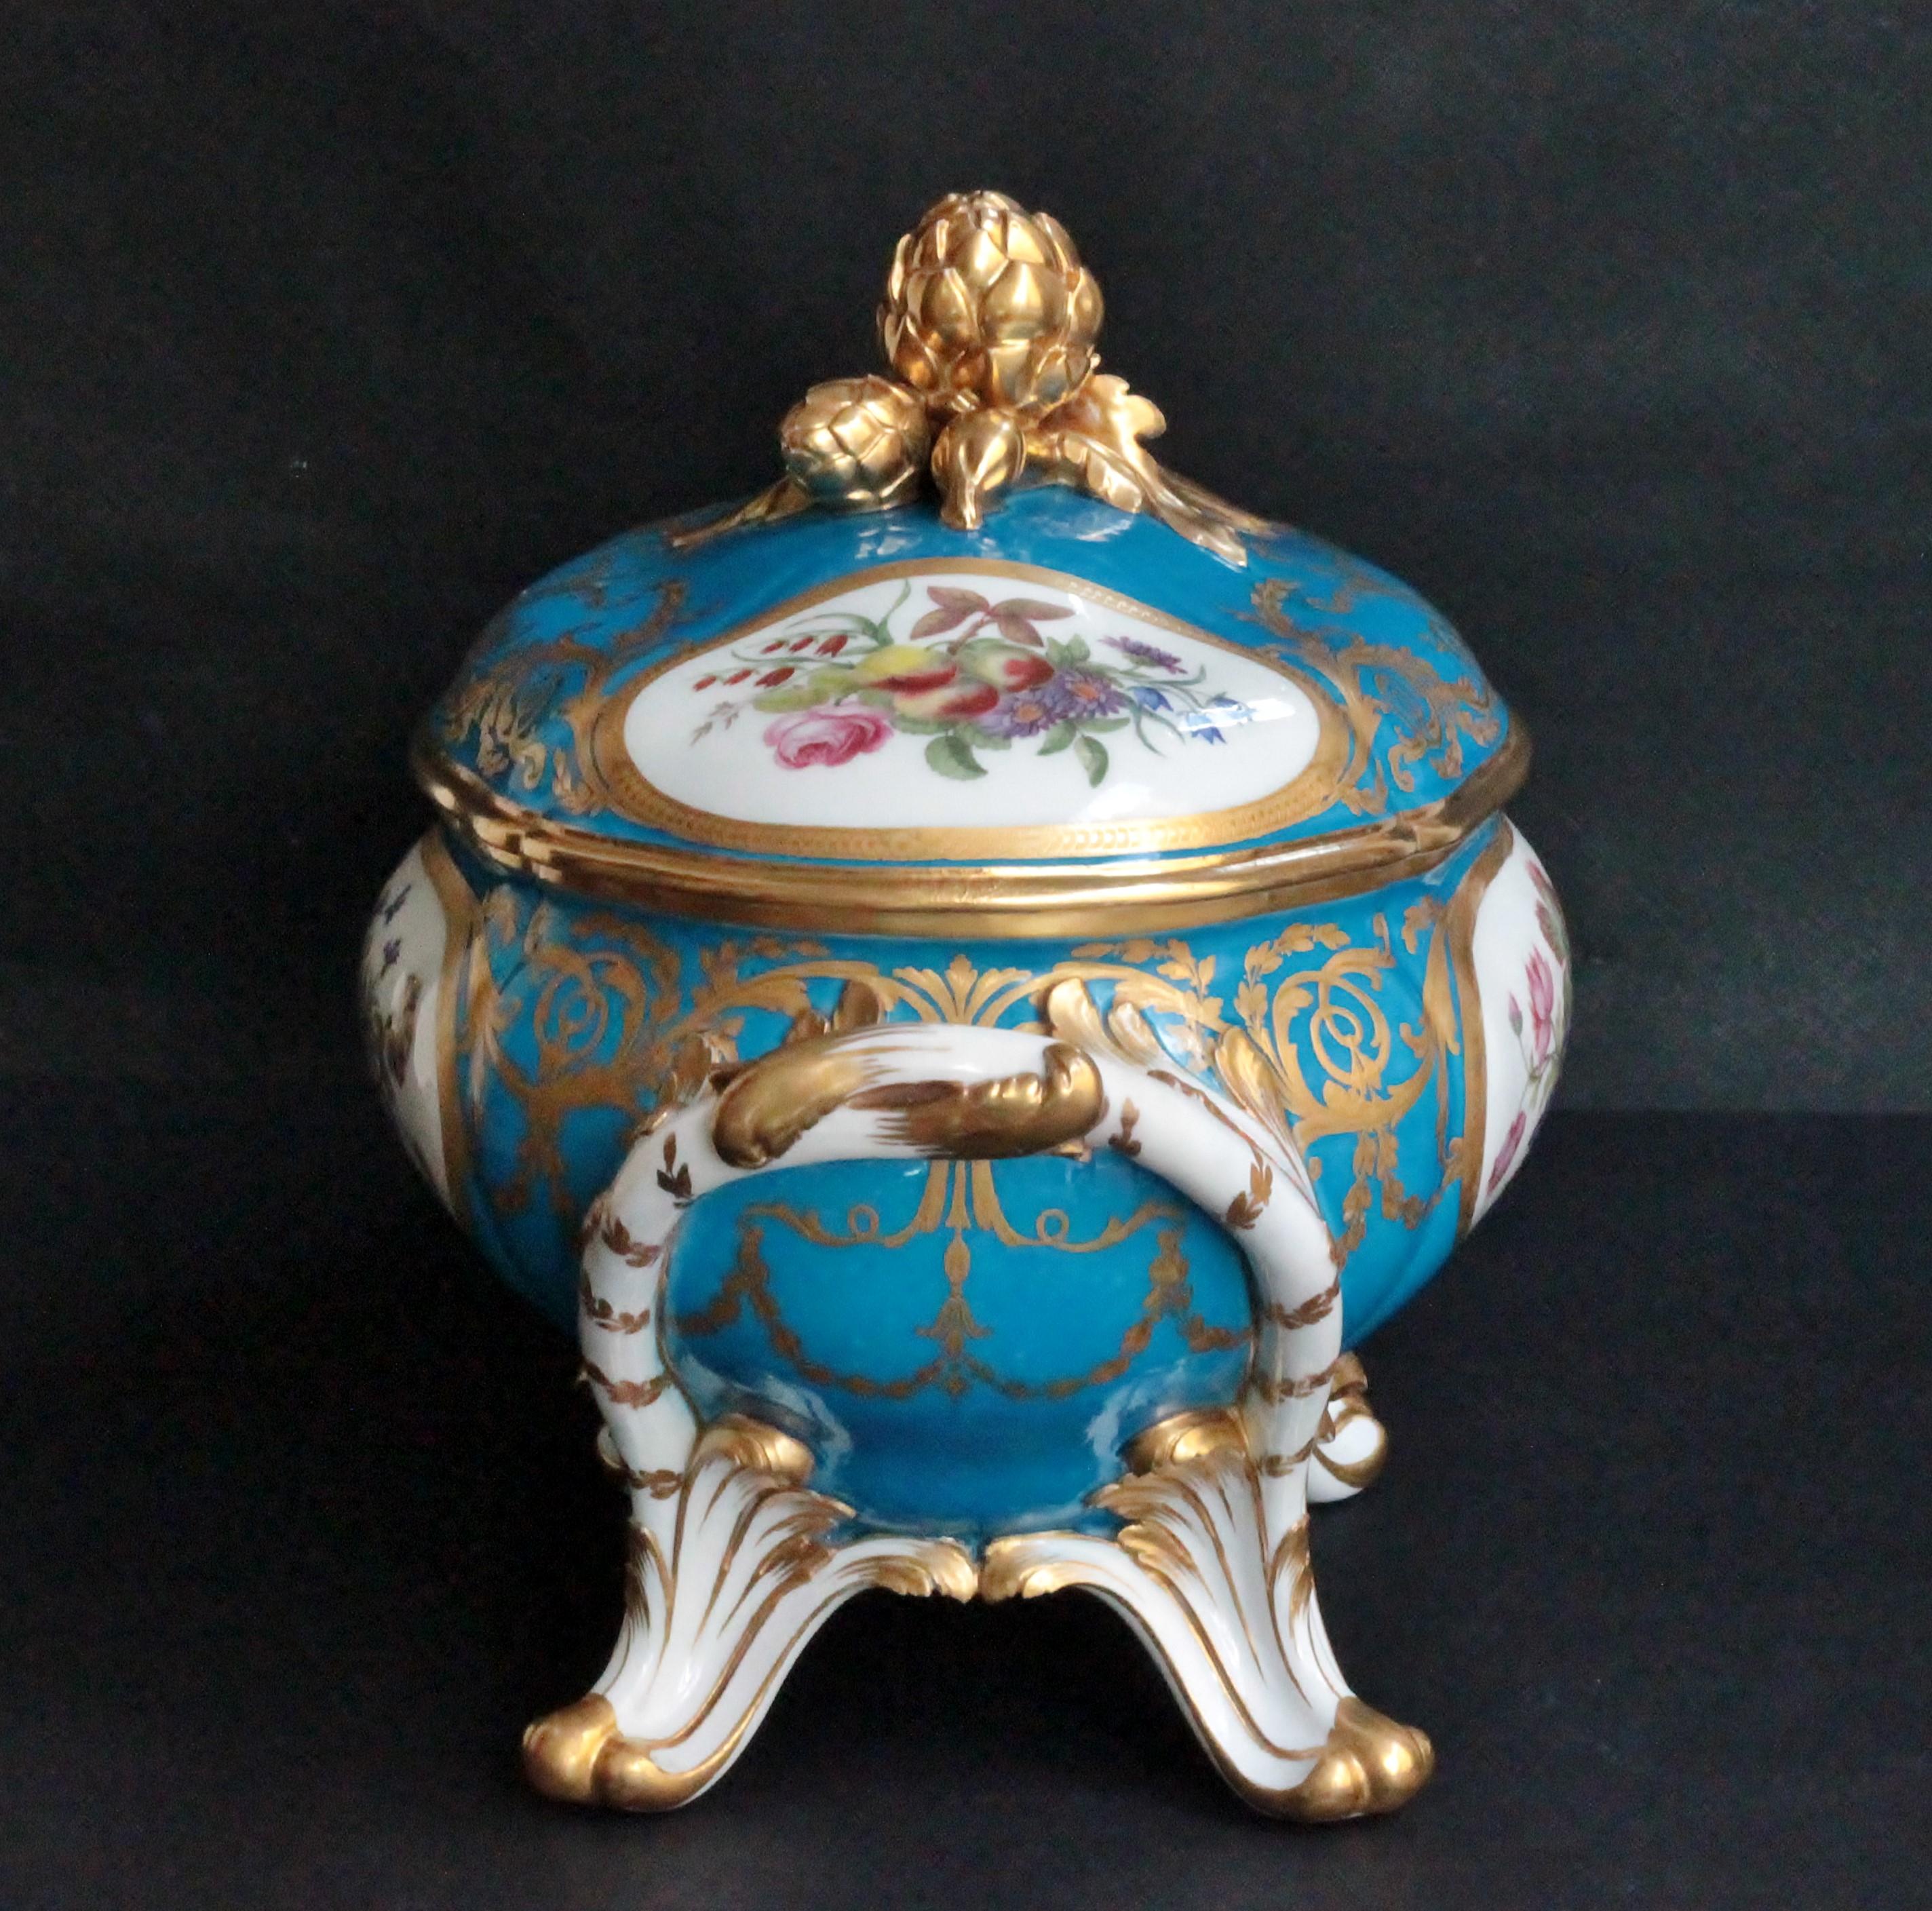 Oval Tureen and Cover of Sevres Porcelain, Turquoise Blue Ground, 18th Century 1